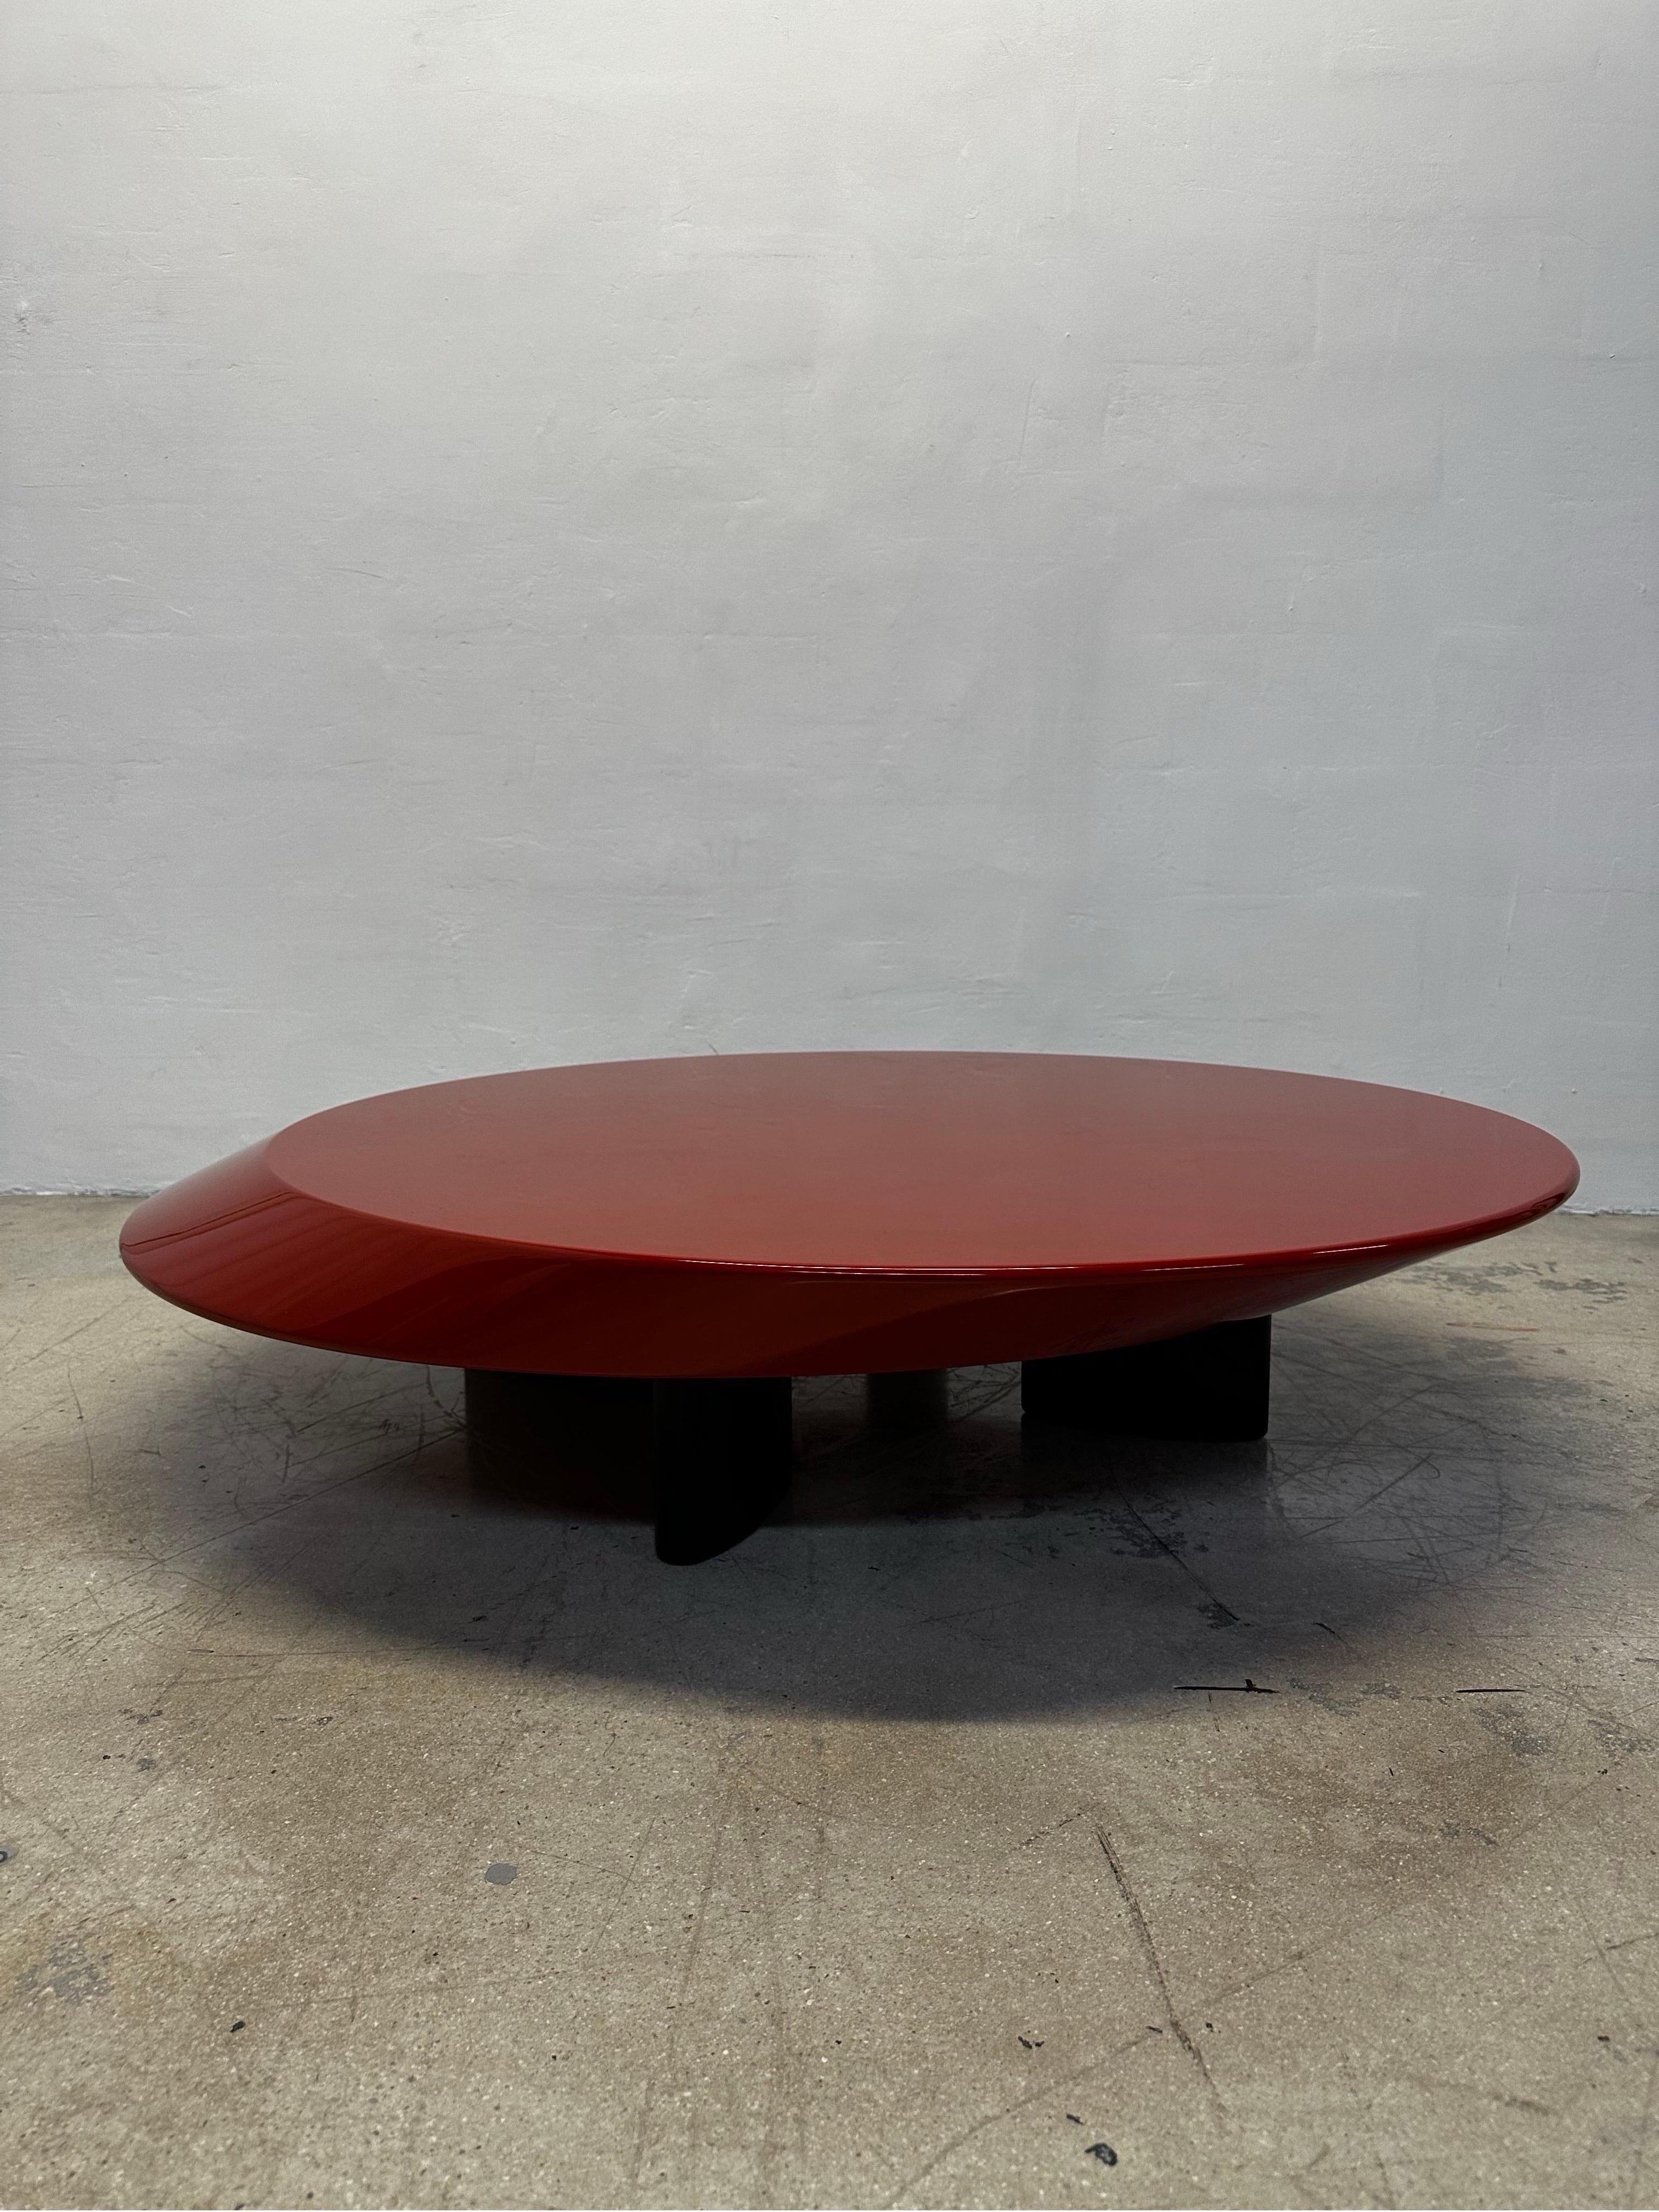 Accordo coffee table with China red glossy lacquered top and matte black wood feet designed by Charlotte Perriand for Cassina.

Low table designed by Charlotte Perriand in 1985. Relaunched by Cassina in 2009. Manufactured by Cassina in Italy. This